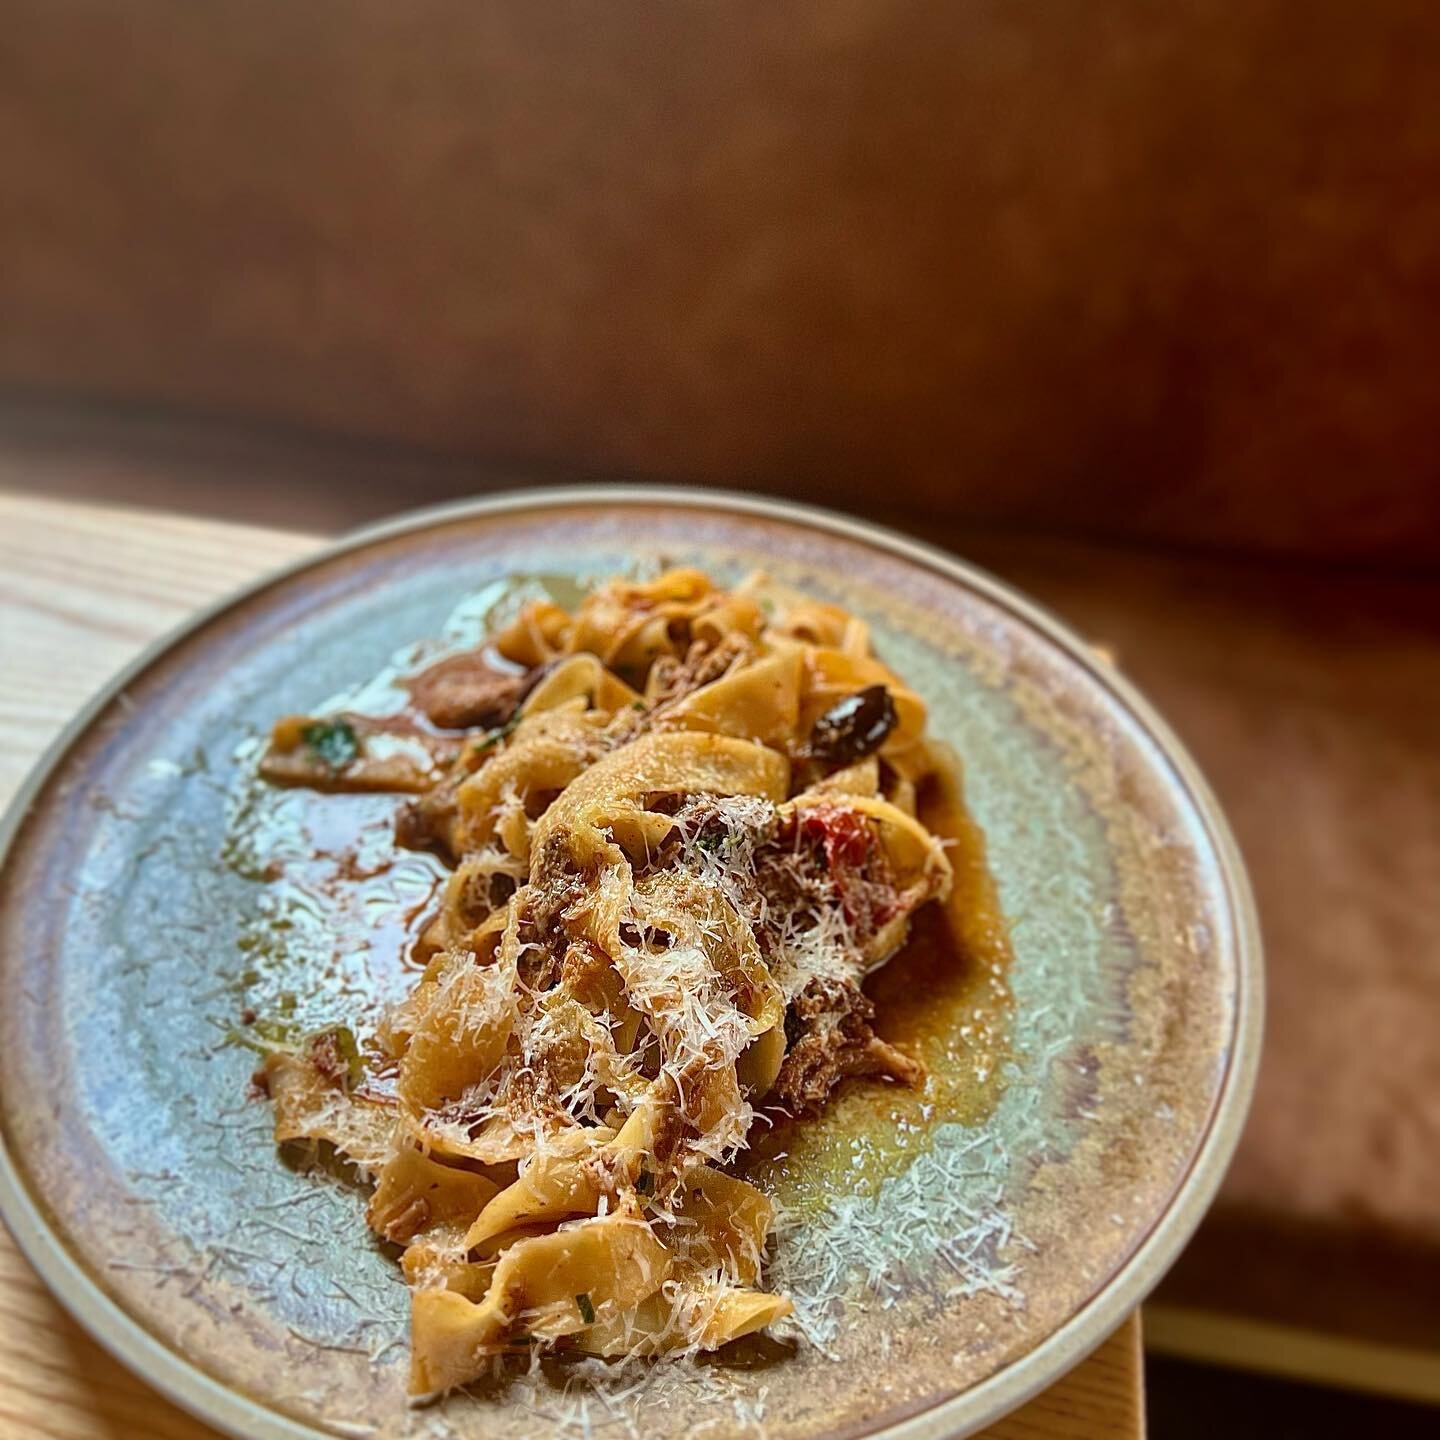 As the winds pick up around Wellington we&rsquo;re serving up our Lamb &amp; Olive Ragu Pappardelle from 11:30AM. It&rsquo;s hearty, warm and delicious; everything you want when a polar blast is forecast to casually pass through this week!